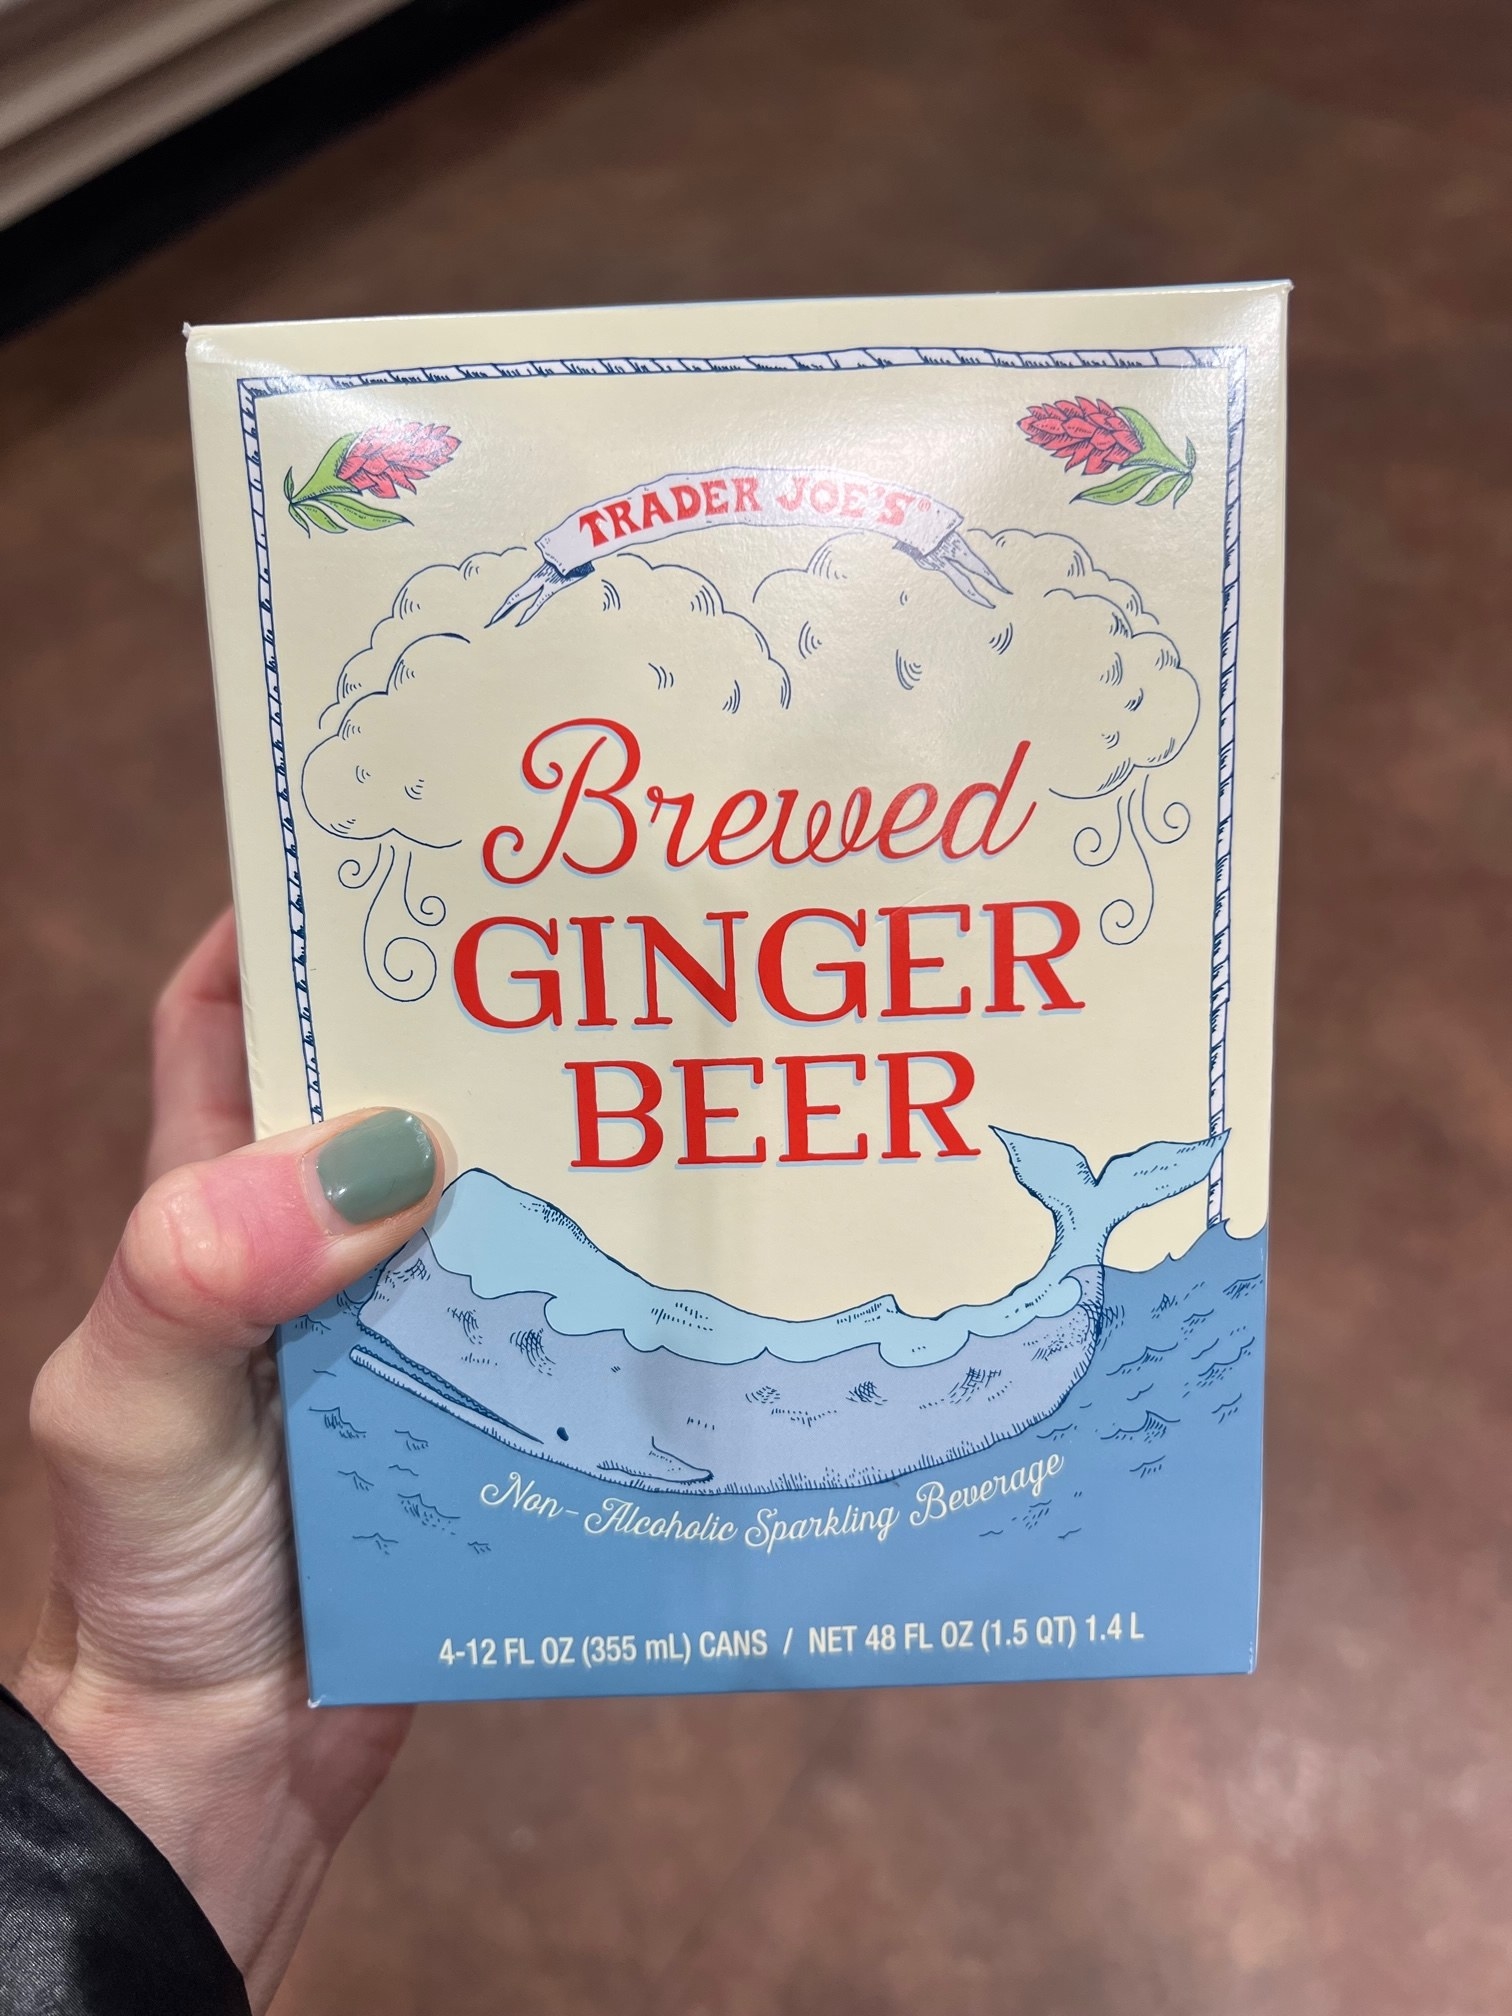 A box of brewed ginger beer